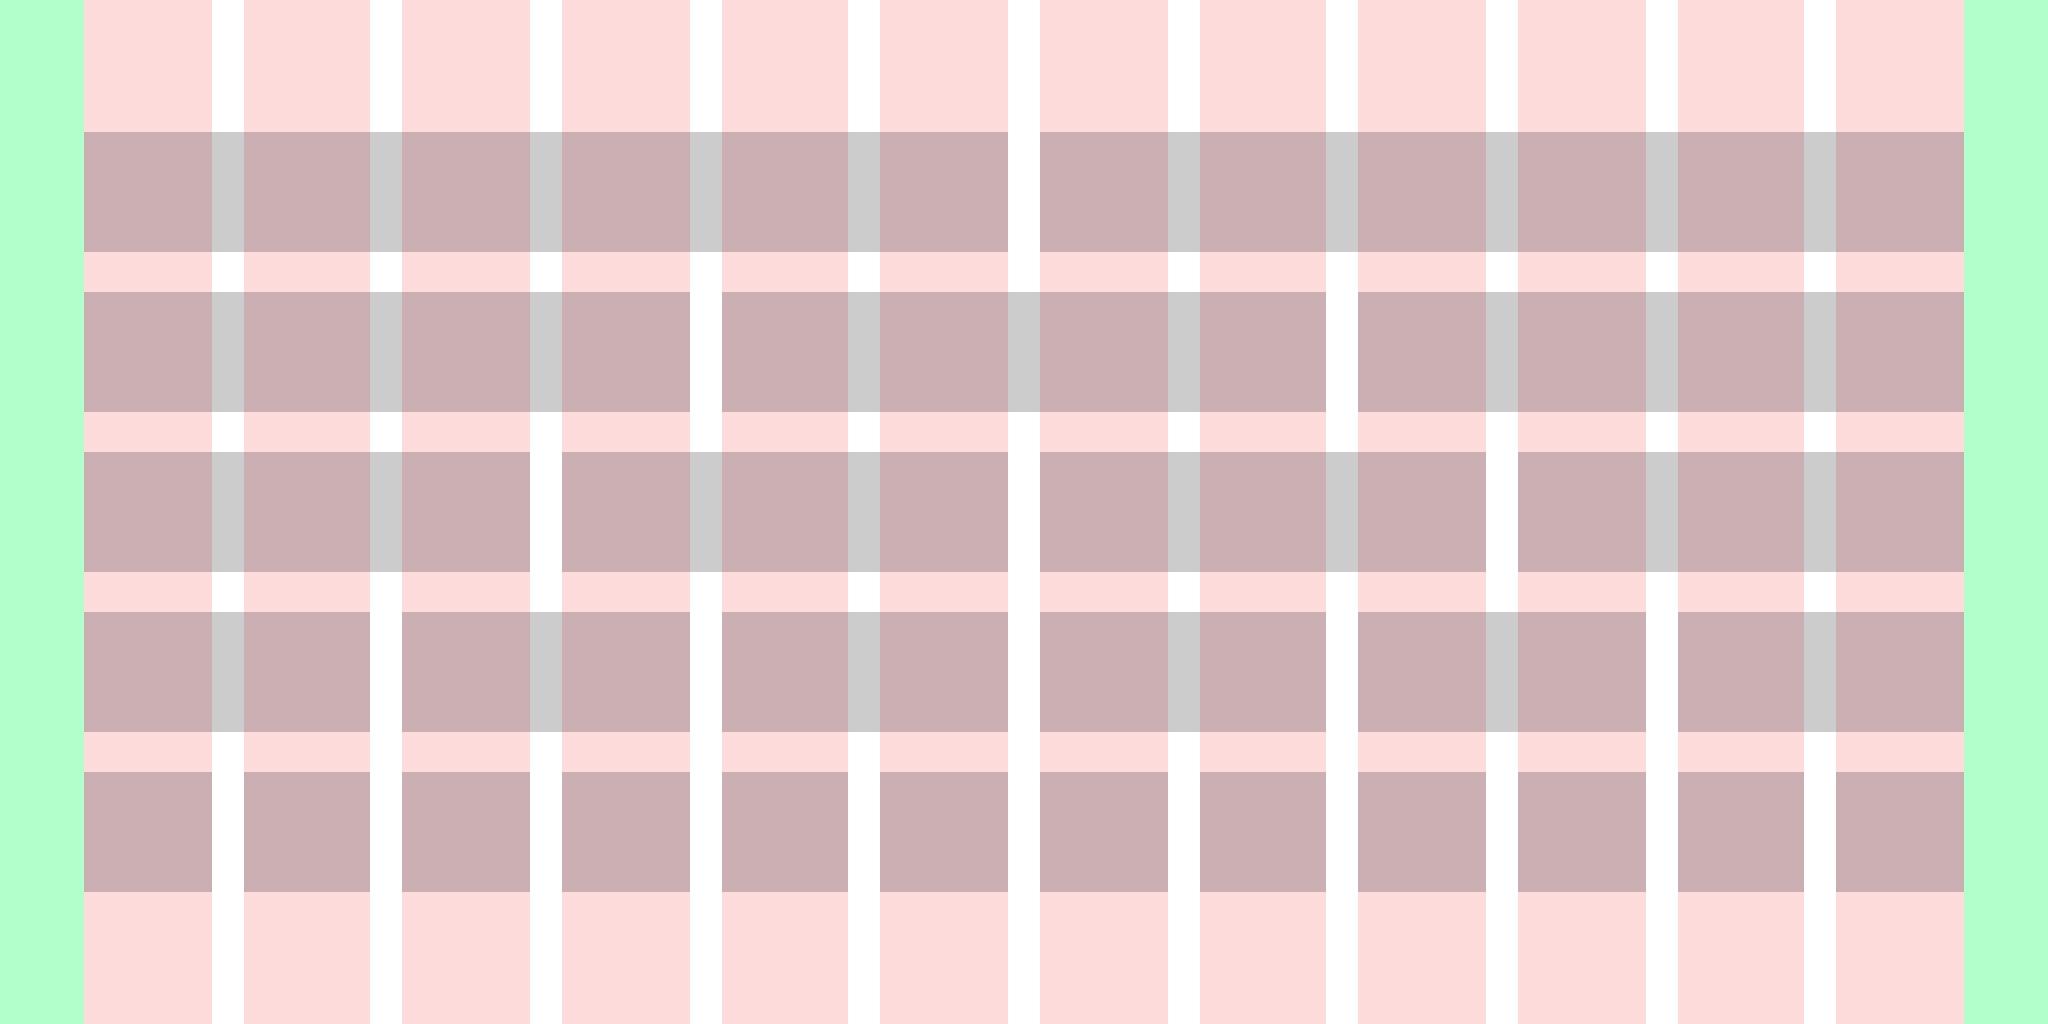 Divisional blocks laid out on a 12 column grid